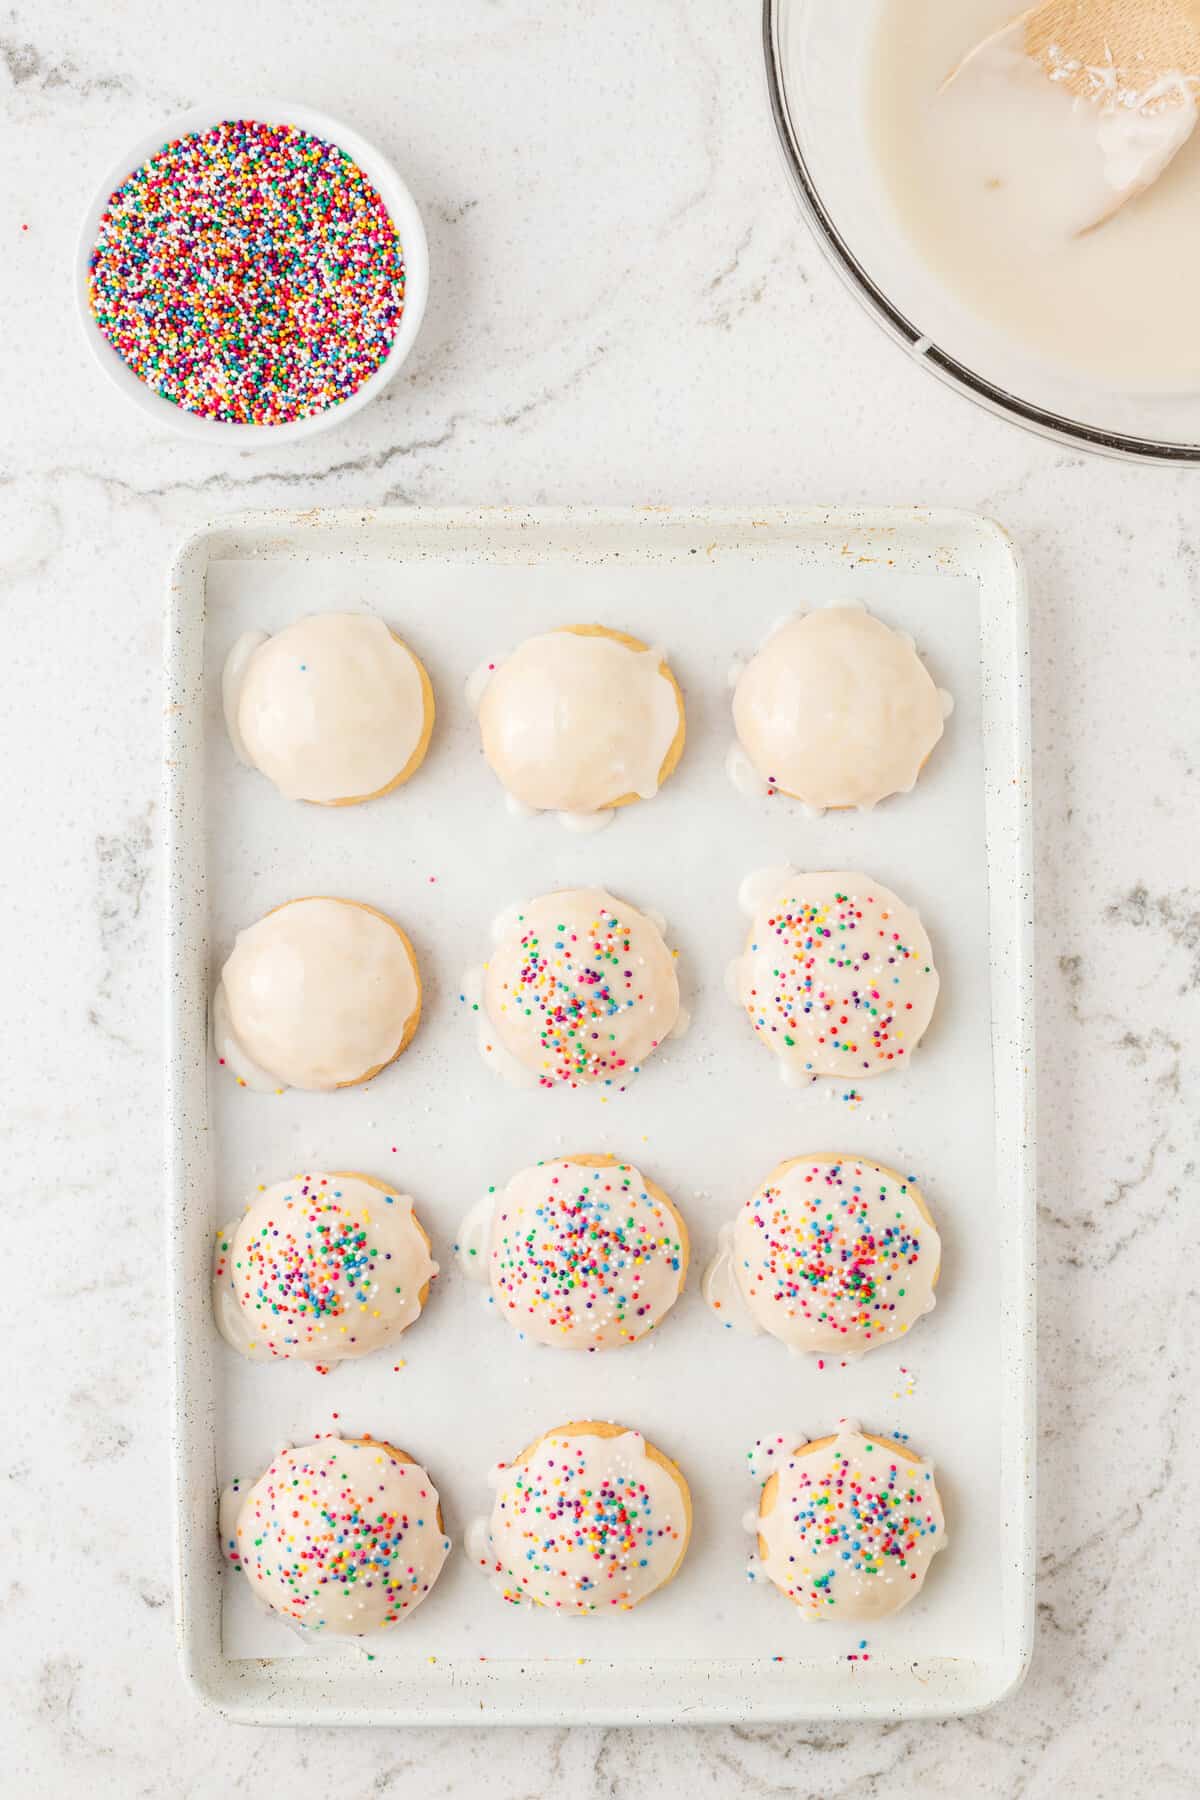 Dip the top of each cookie into the glaze and place them back onto the cookie sheet and had sprinkles to the top of the glaze.